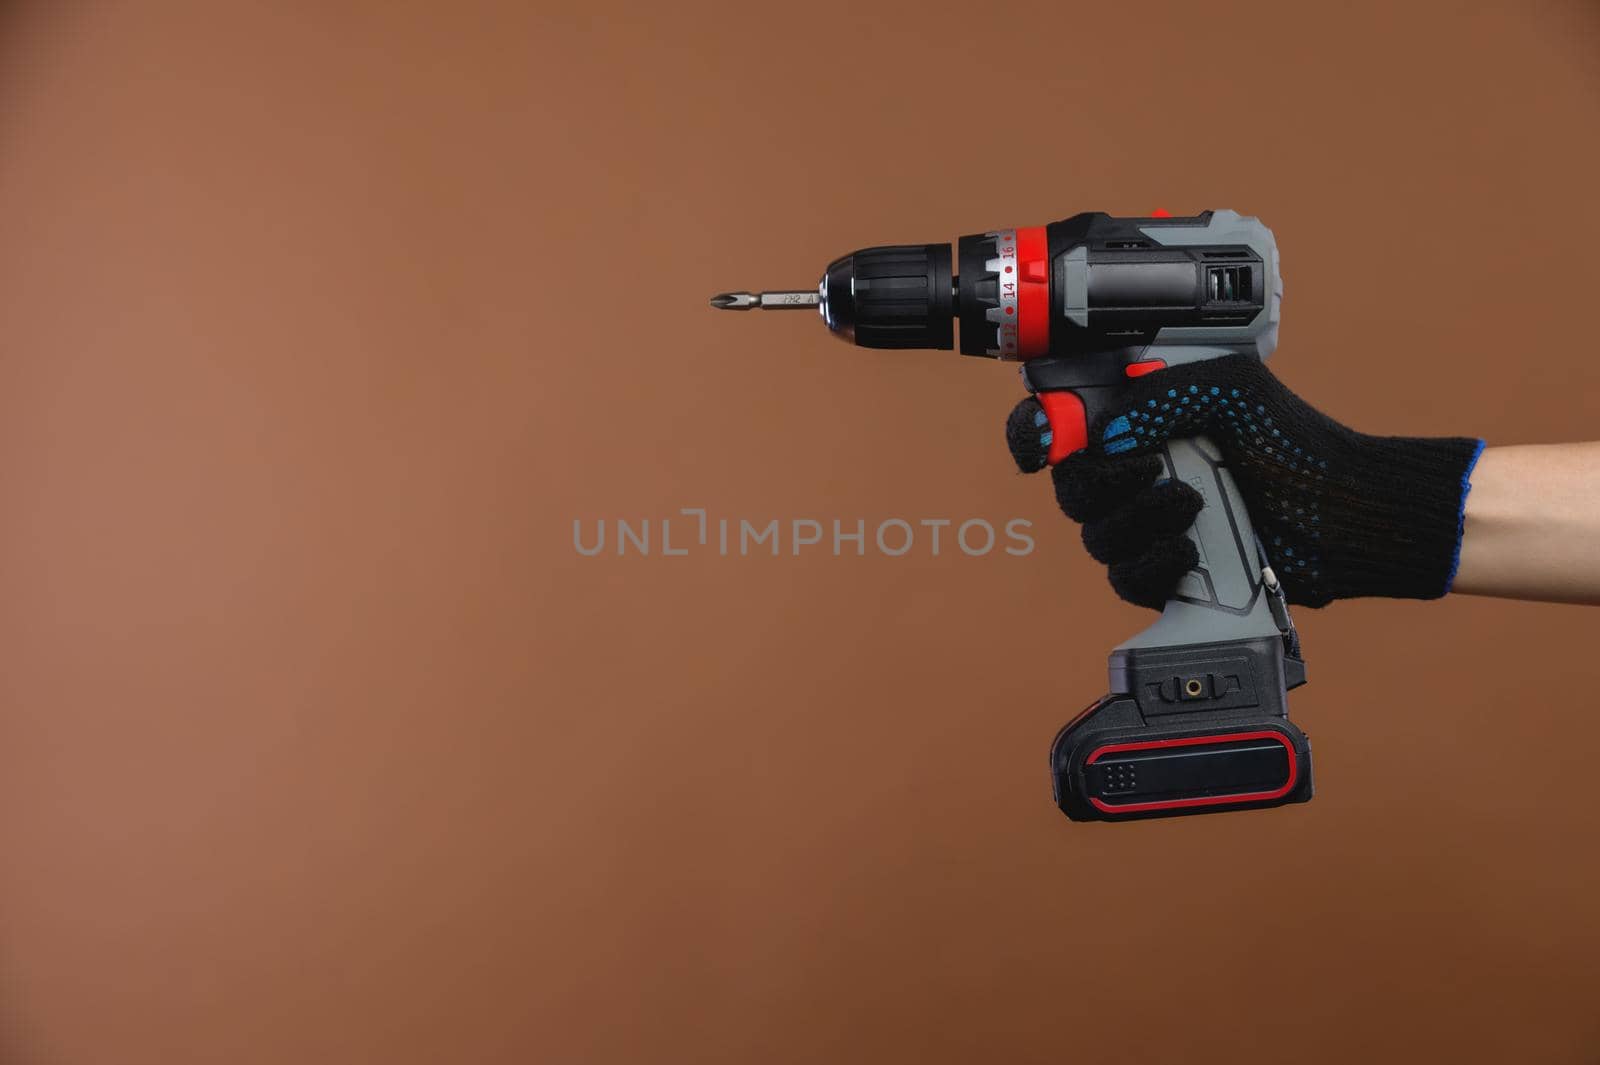 Repair, fix the problem, or tighten the bolt at the construction site. In a female hand a screwdriver or drill, a repair tool, photo on a brown background